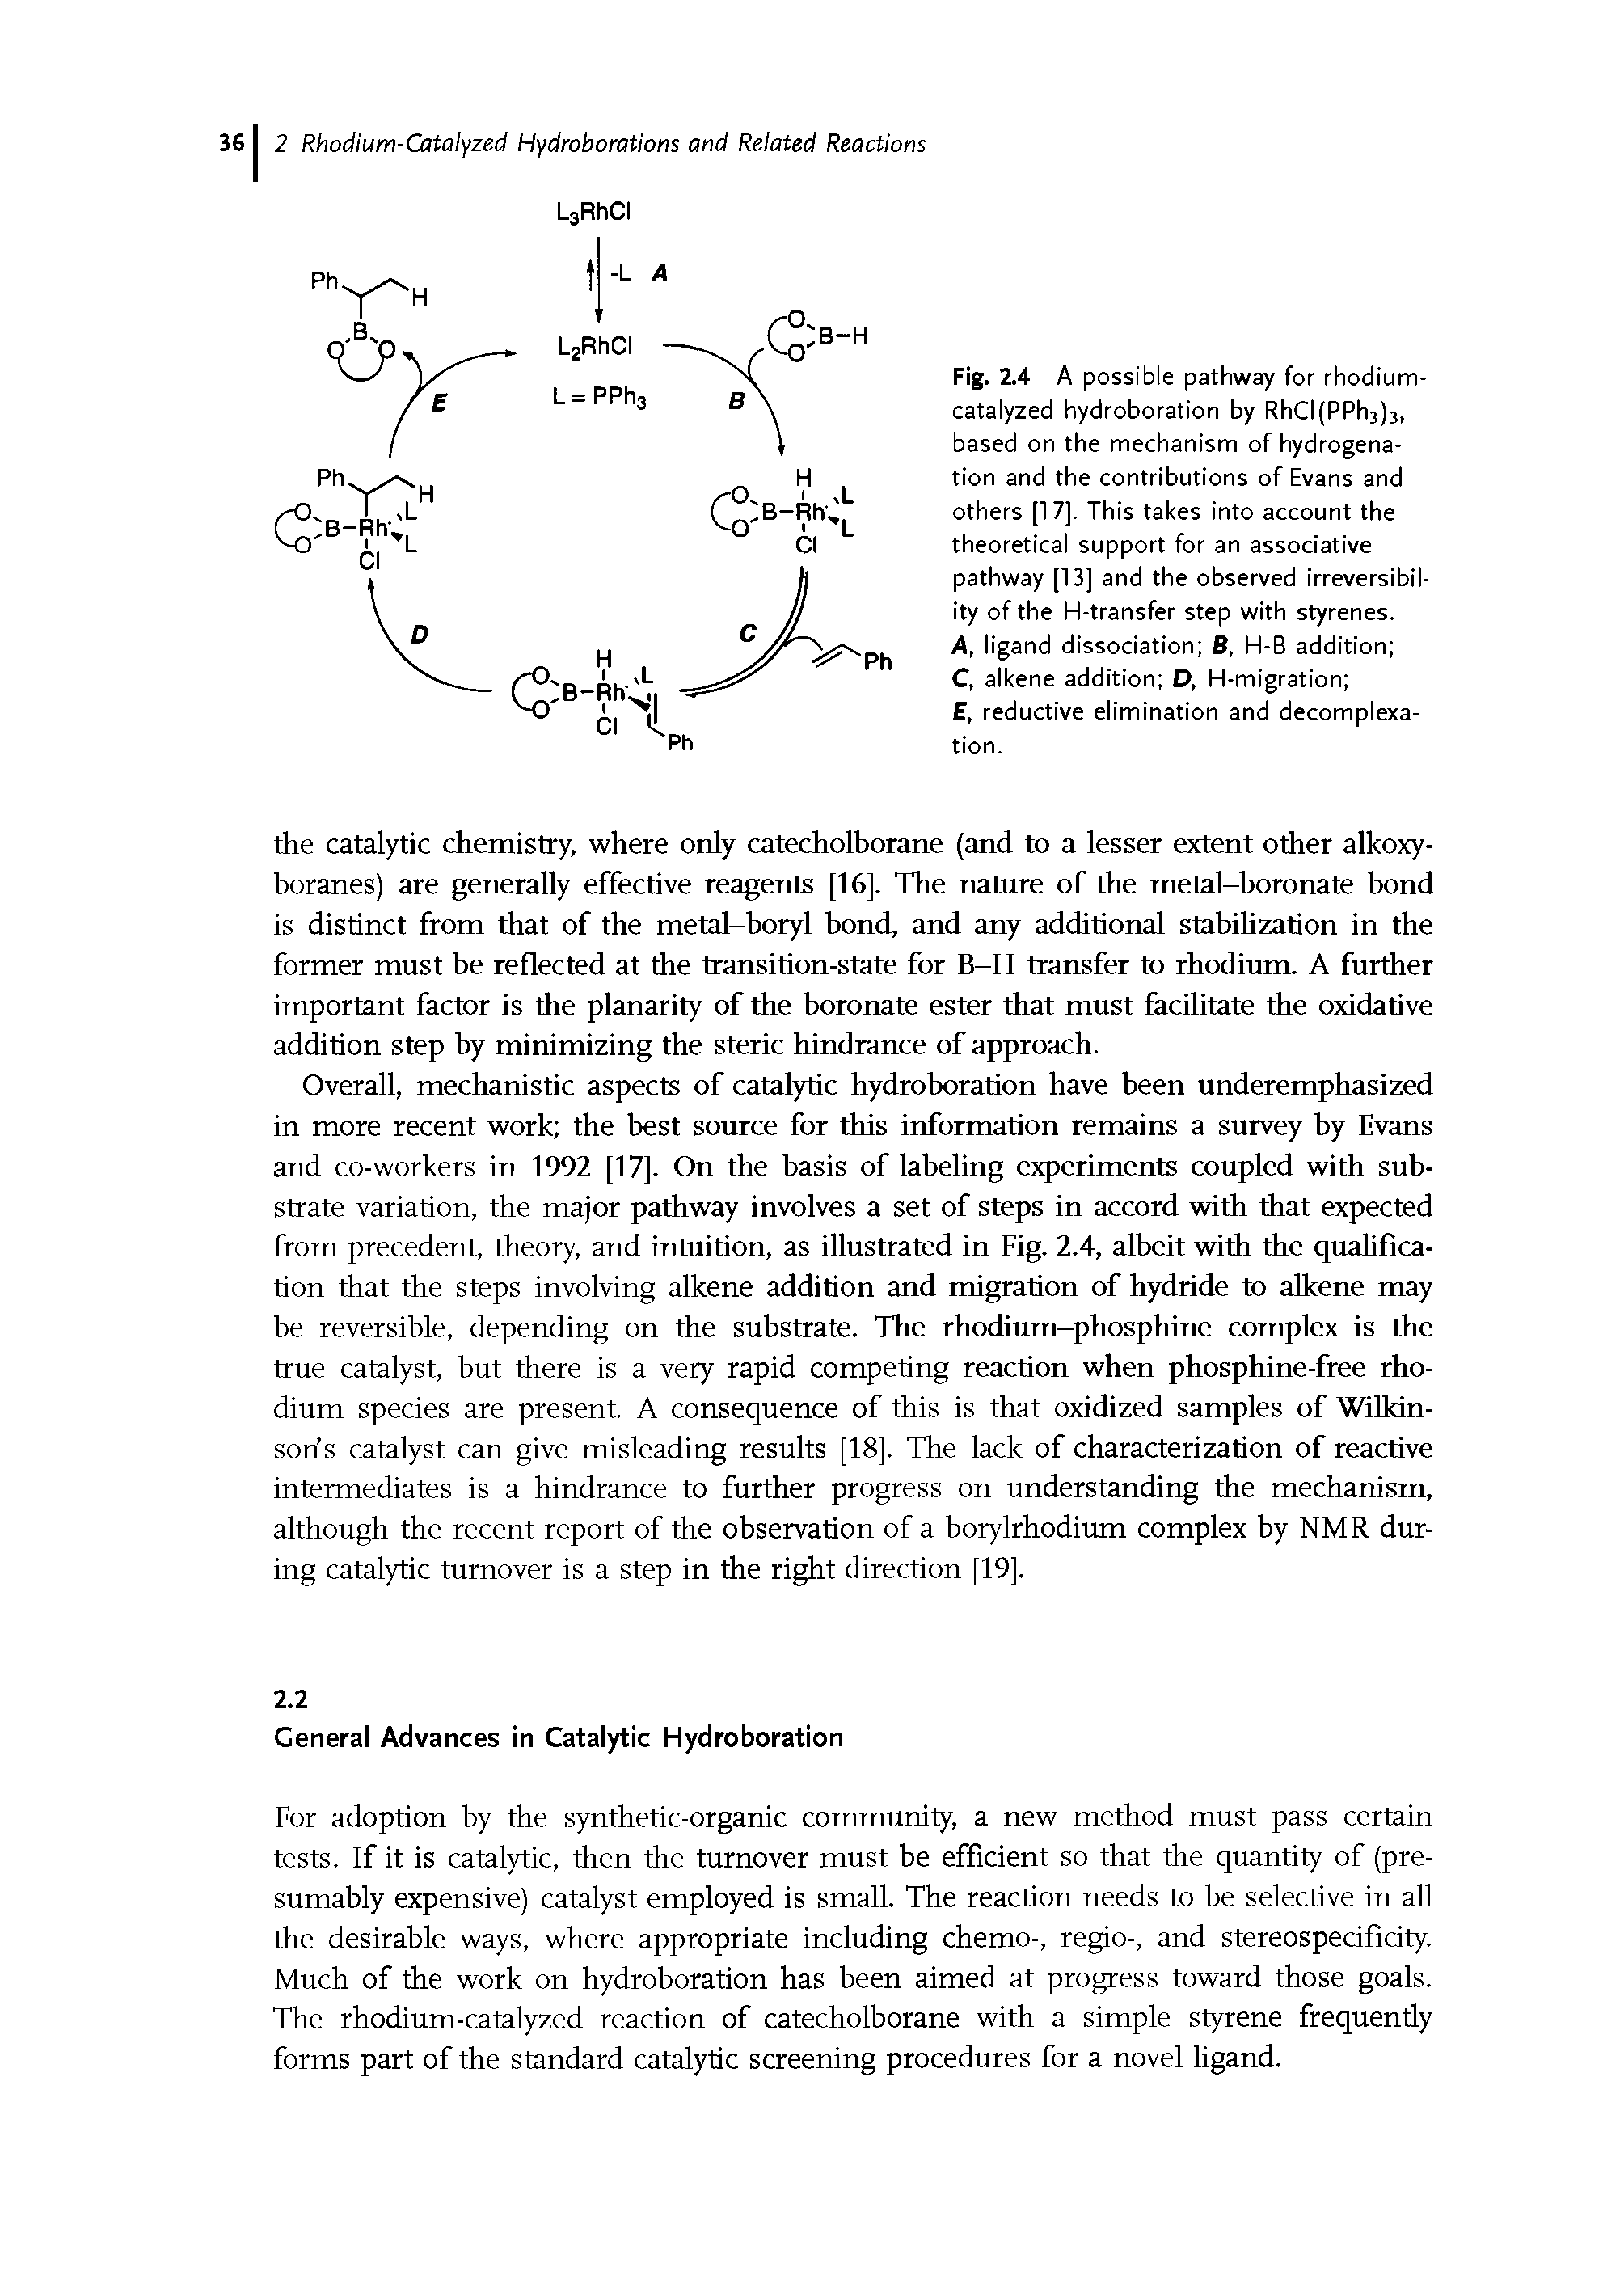 Fig. 2.4 A possible pathway for rhodium-catalyzed hydroboration by RhCI(PPh3)3, based on the mechanism of hydrogenation and the contributions of Evans and others [17], This takes into account the theoretical support for an associative pathway [13] and the observed irreversibility of the H-transfer step with styrenes.